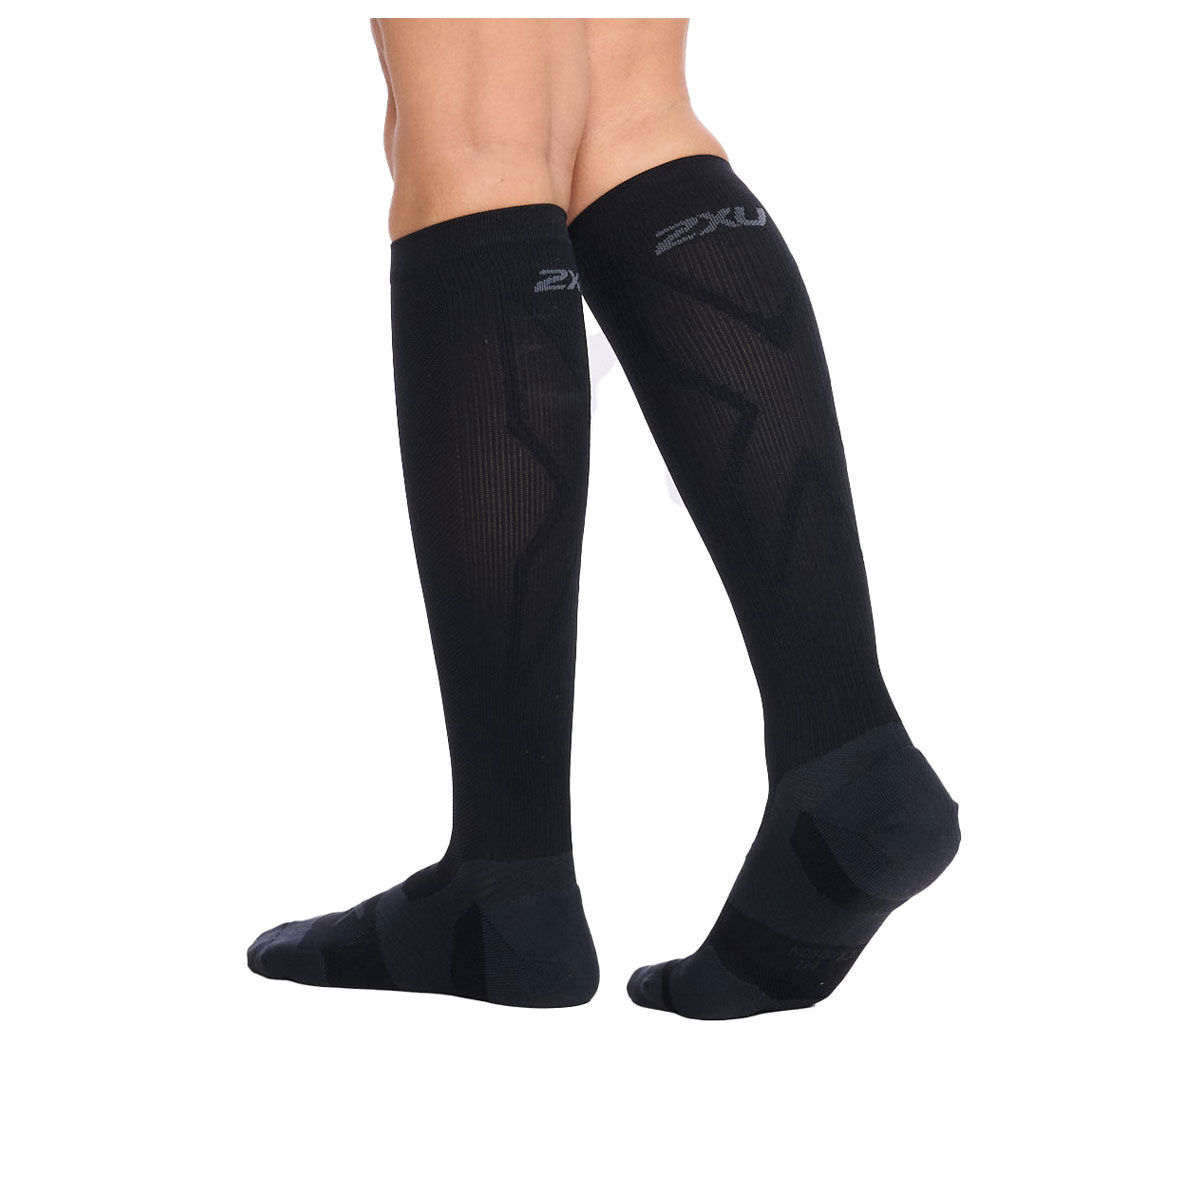  2XU Men's Compression Socks For Recovery, Black/Grey